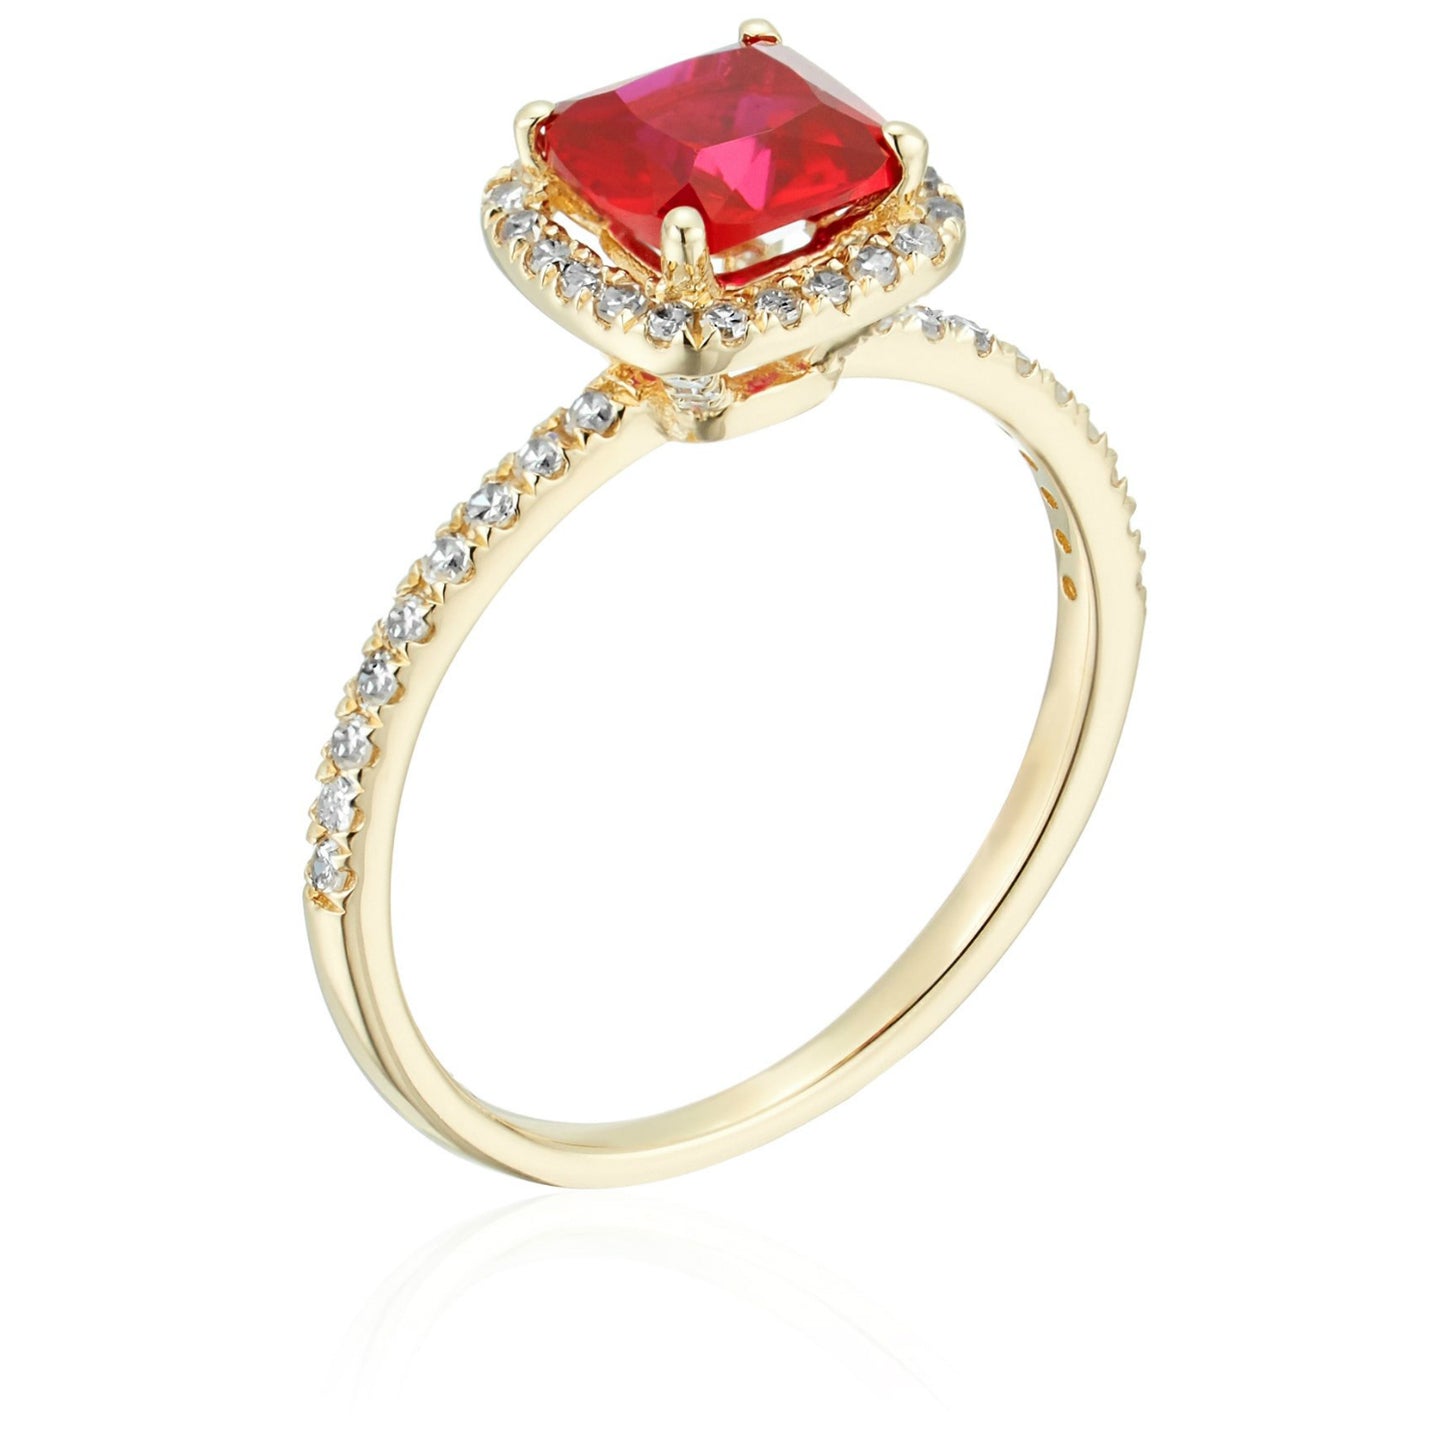 10k Yellow Gold Created Ruby and Diamond Cushion Halo Engagement Ring (1/4cttw, H-I Color, I1-I2 Clarity), - pinctore